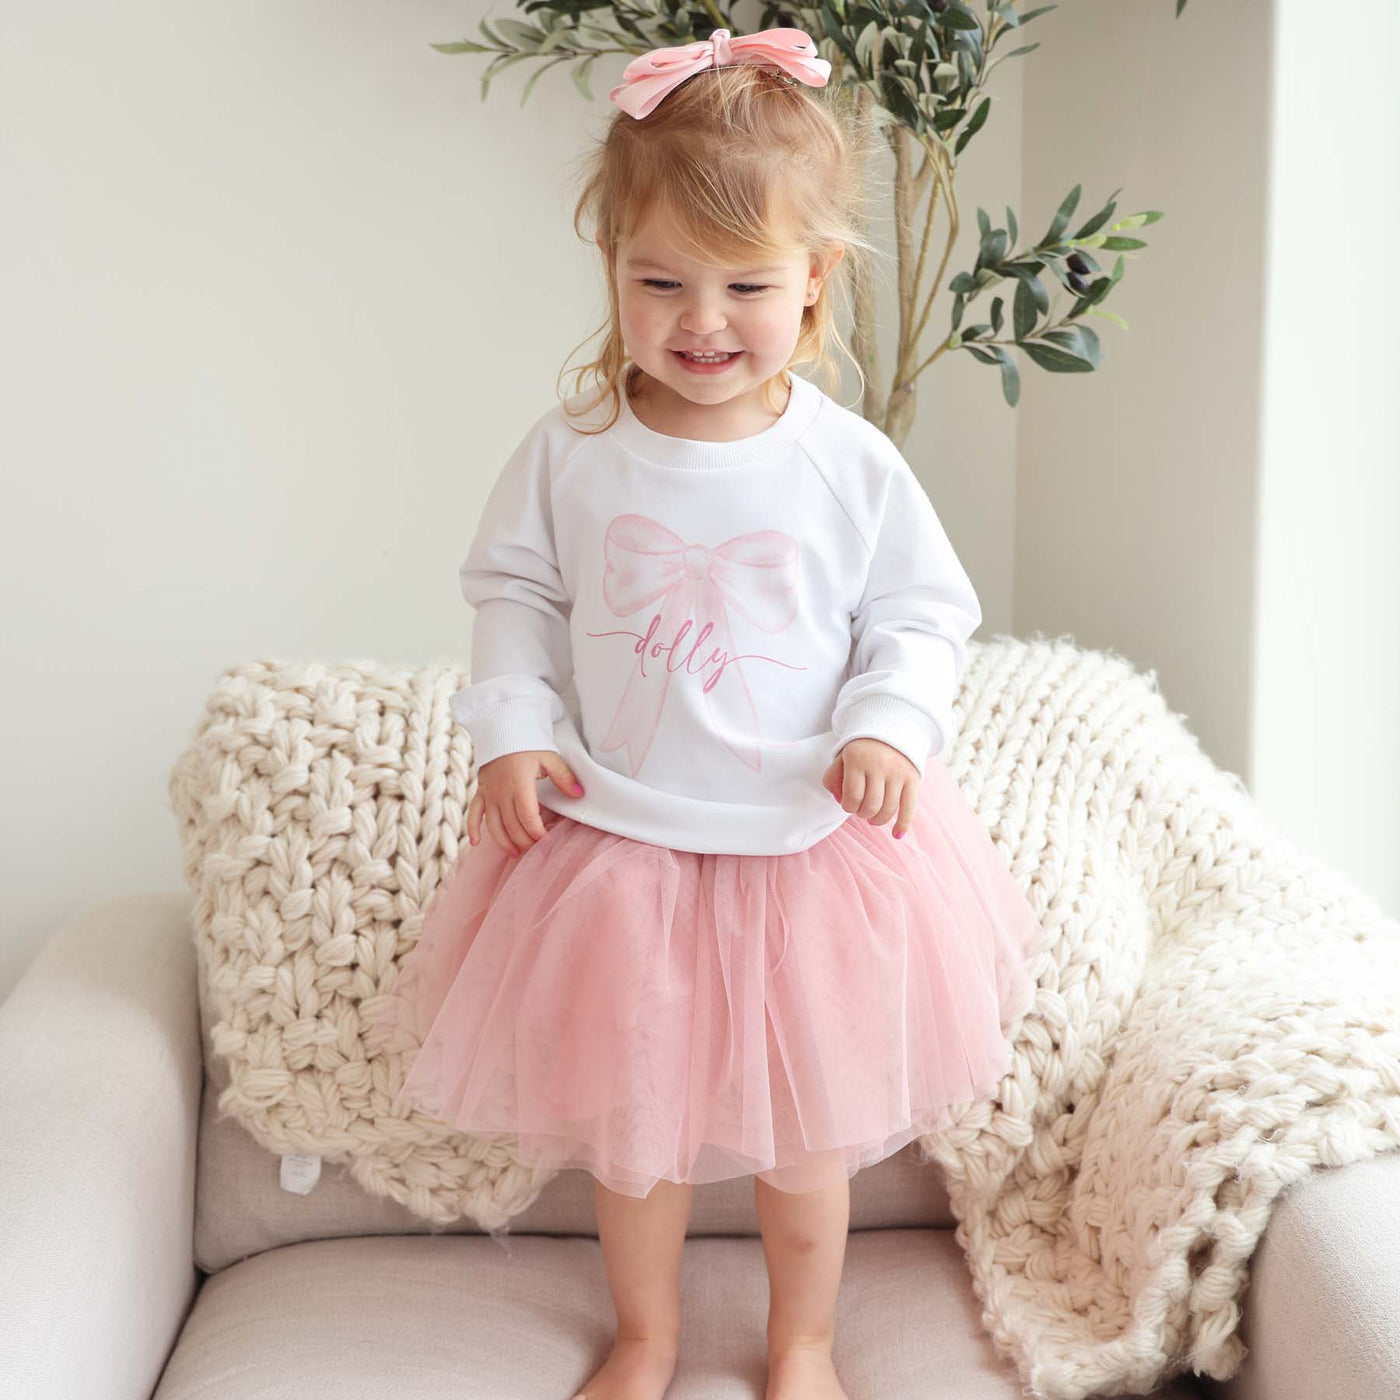 toddler sweatshirt with bow on it personalized 